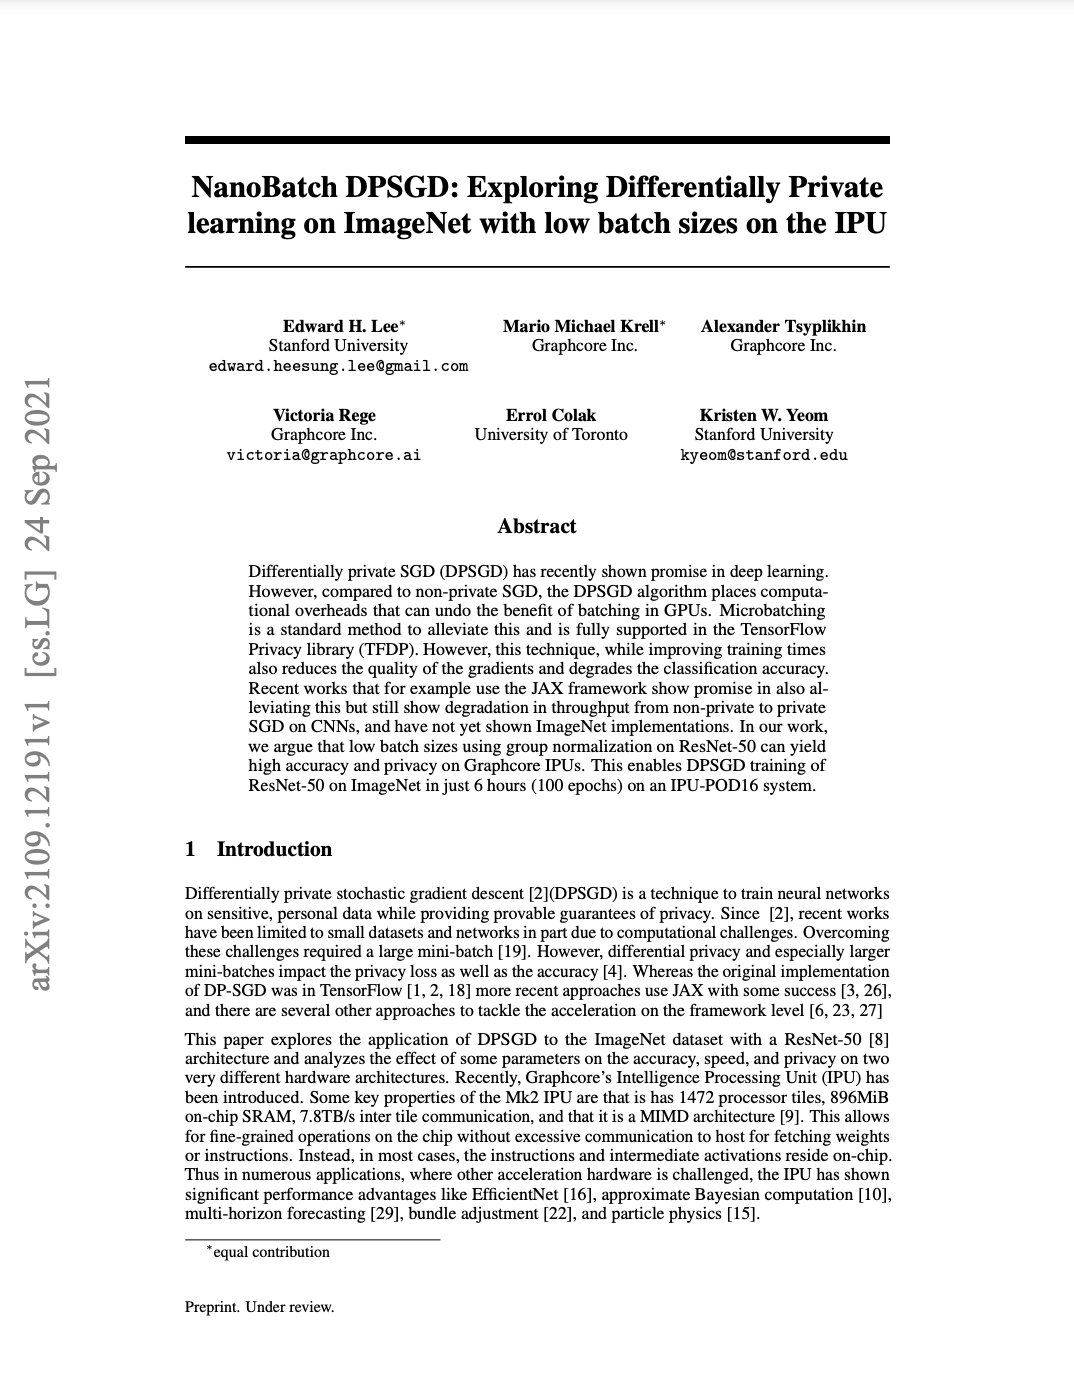 Stanford University & Graphcore: NanoBatch DPSGD: Exploring Differentially Private learning on ImageNet with low batch sizes on the IPU